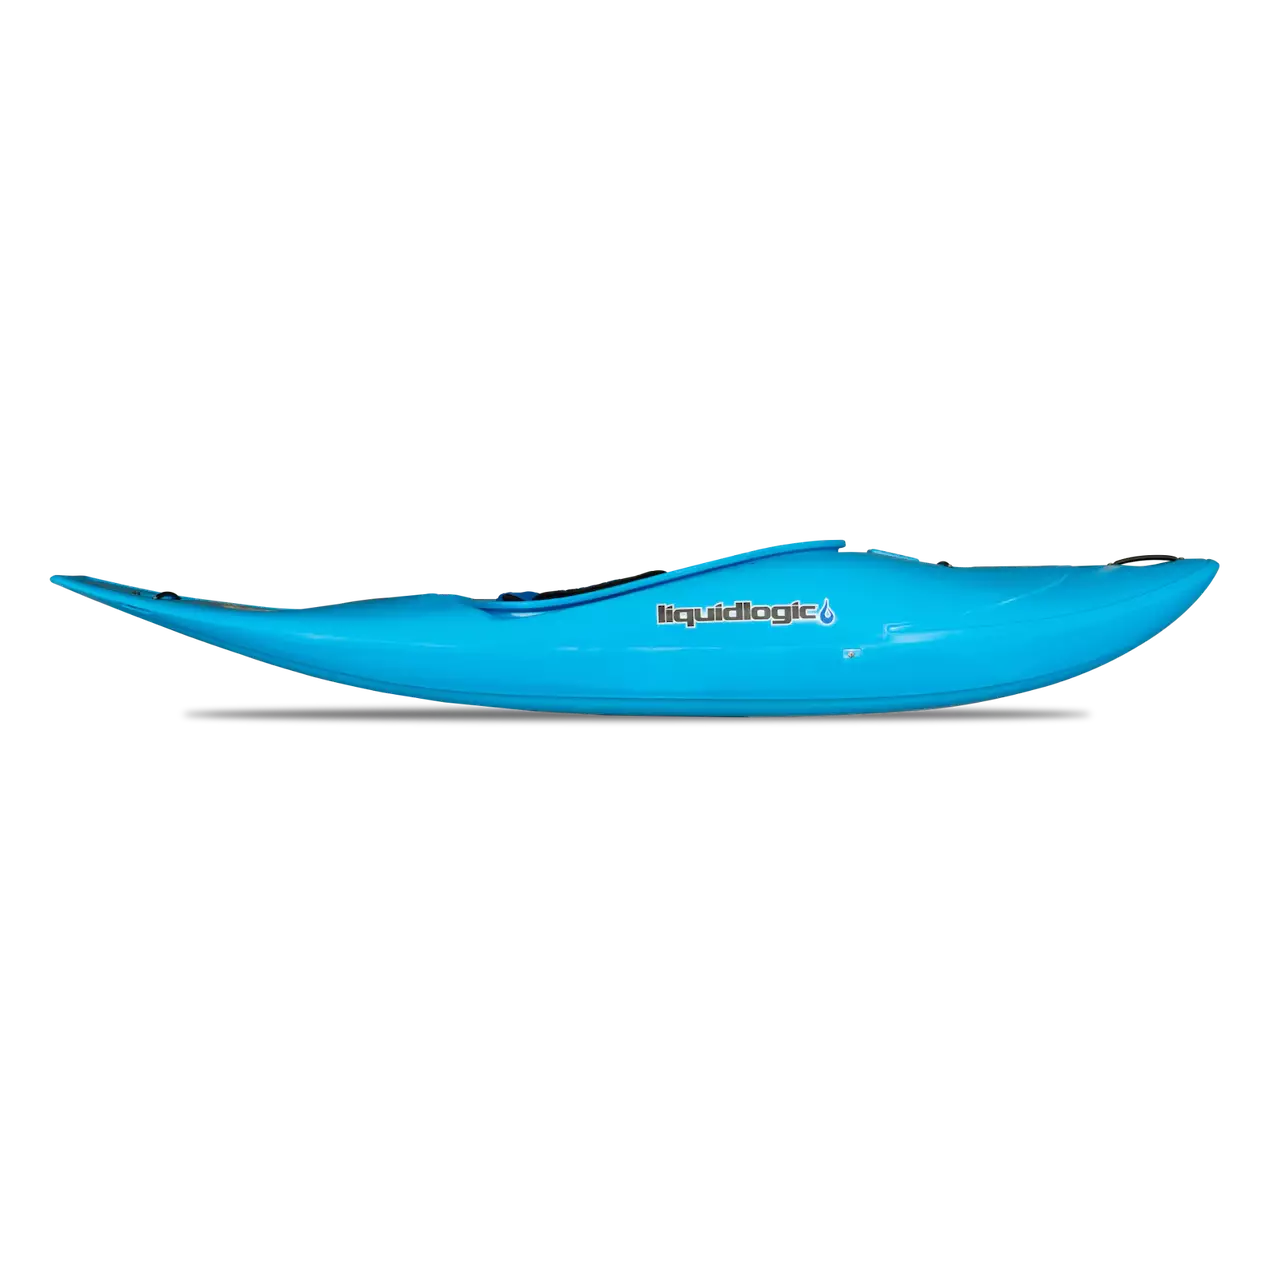 Featuring the Sweet Ride new, play boat, pre-order, river runner kayak manufactured by LiquidLogic shown here from a fourth angle.